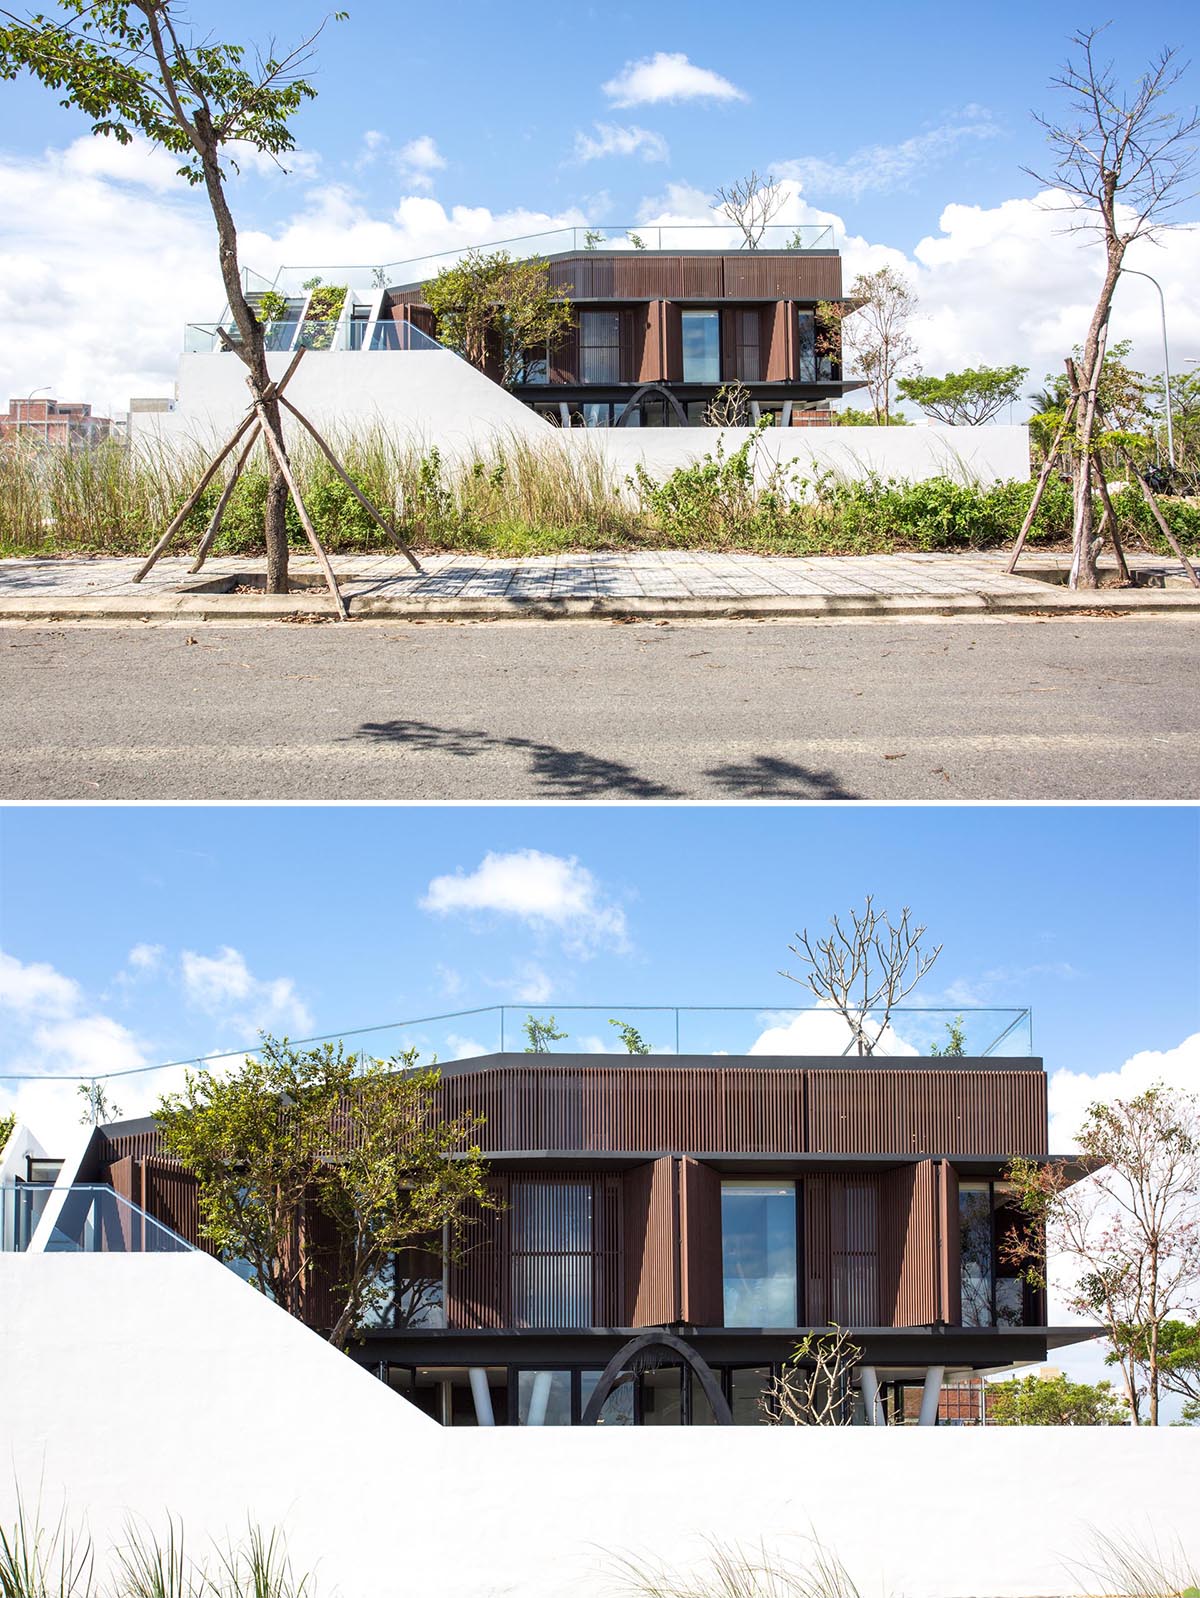 This modern house has a wood exterior with folding shutters, that help to protect the home in the stormy season.